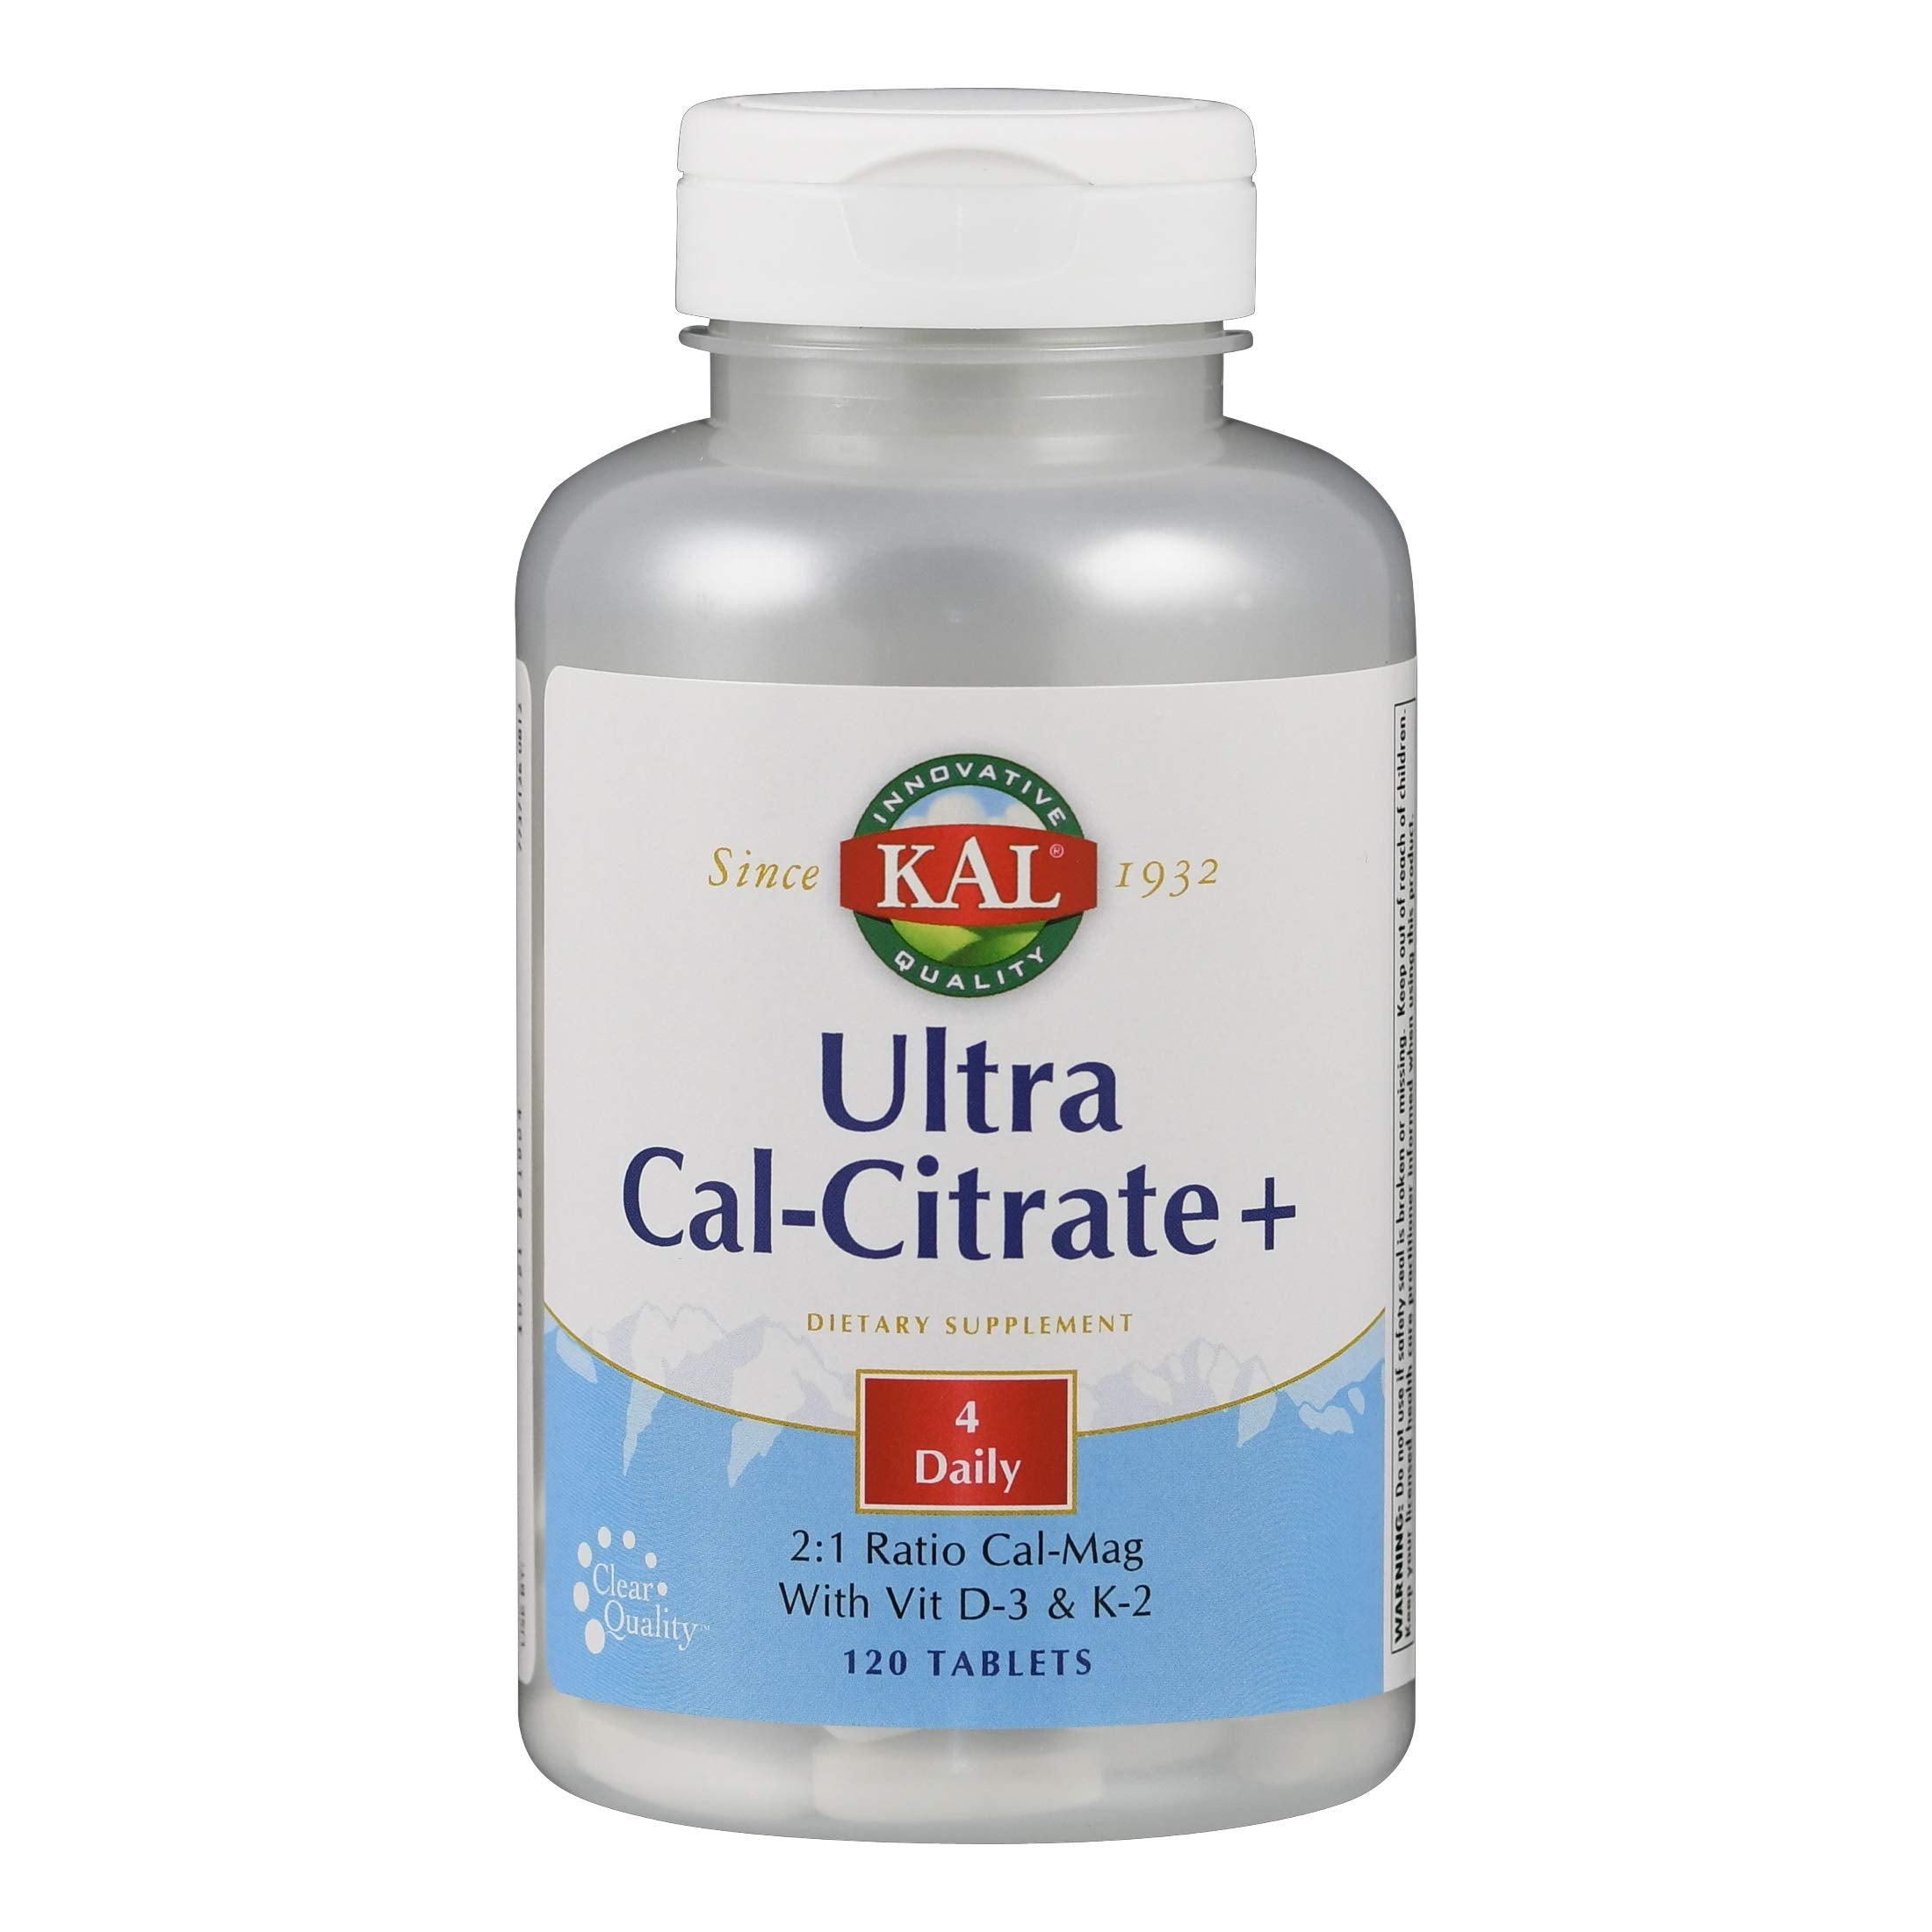 KAL UltraCal-Citrate+ 120ct Tablet